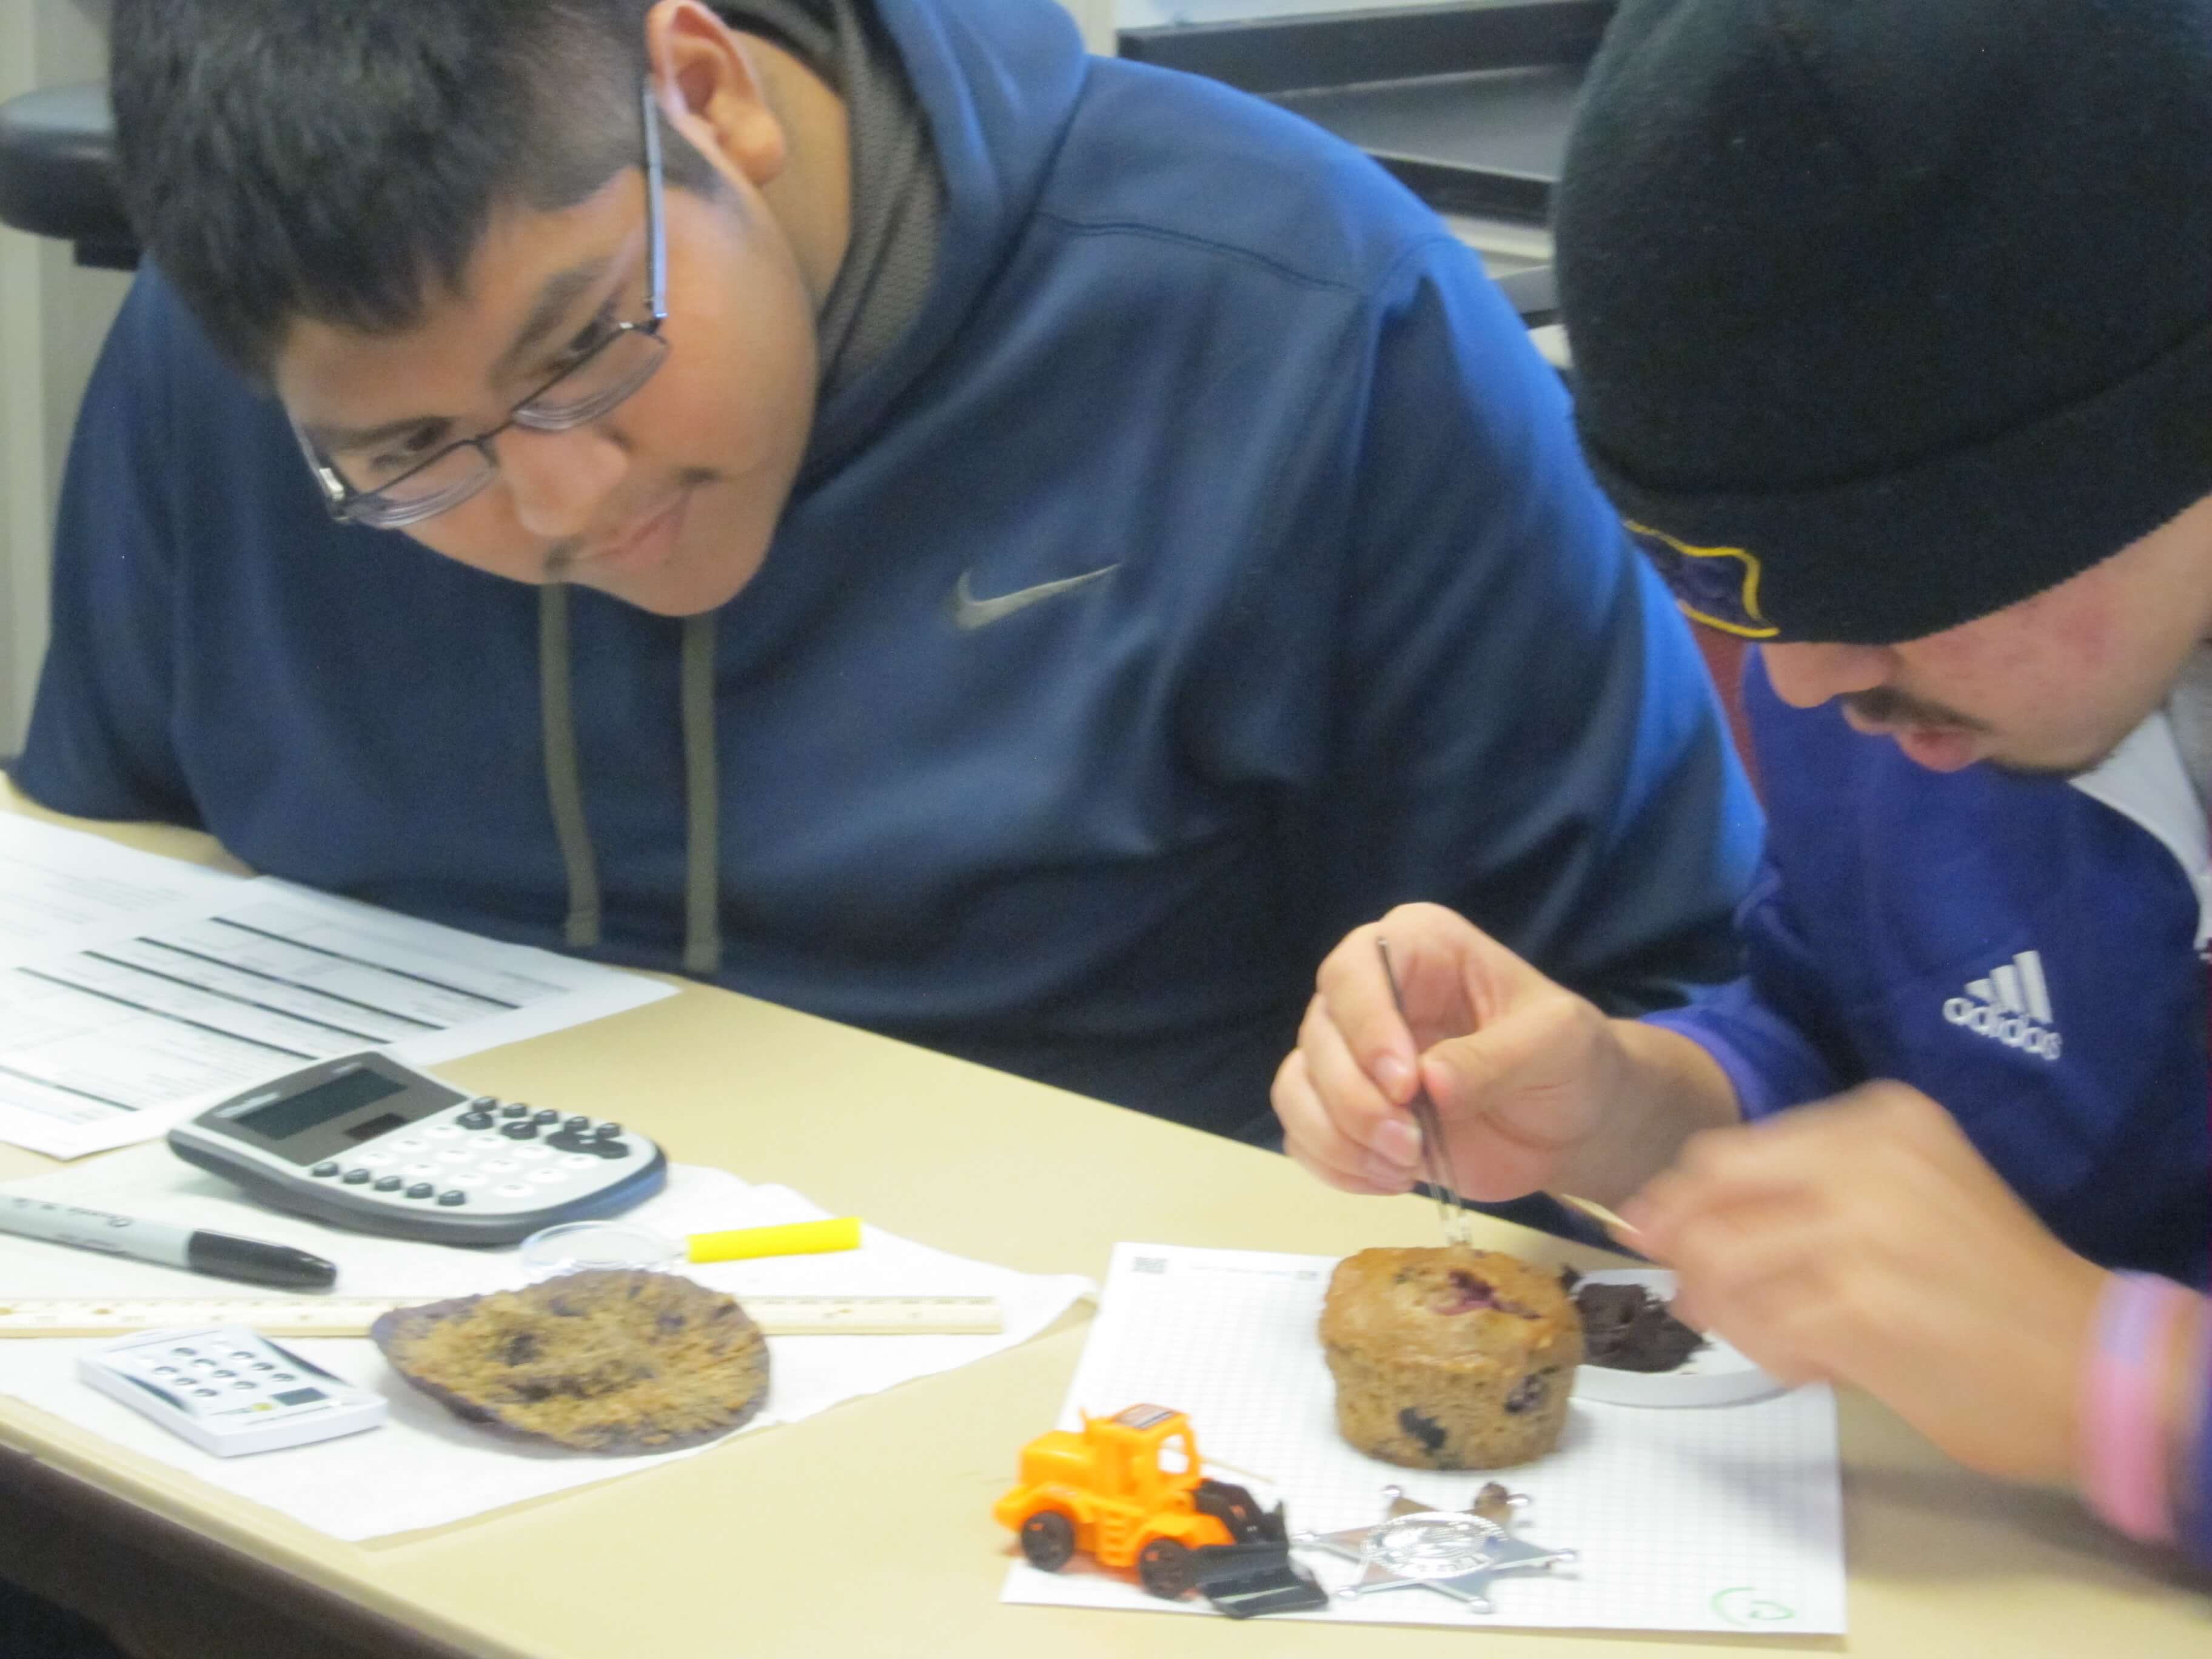 Two individuals participate in muffin mining exercise to learn about copper mining.